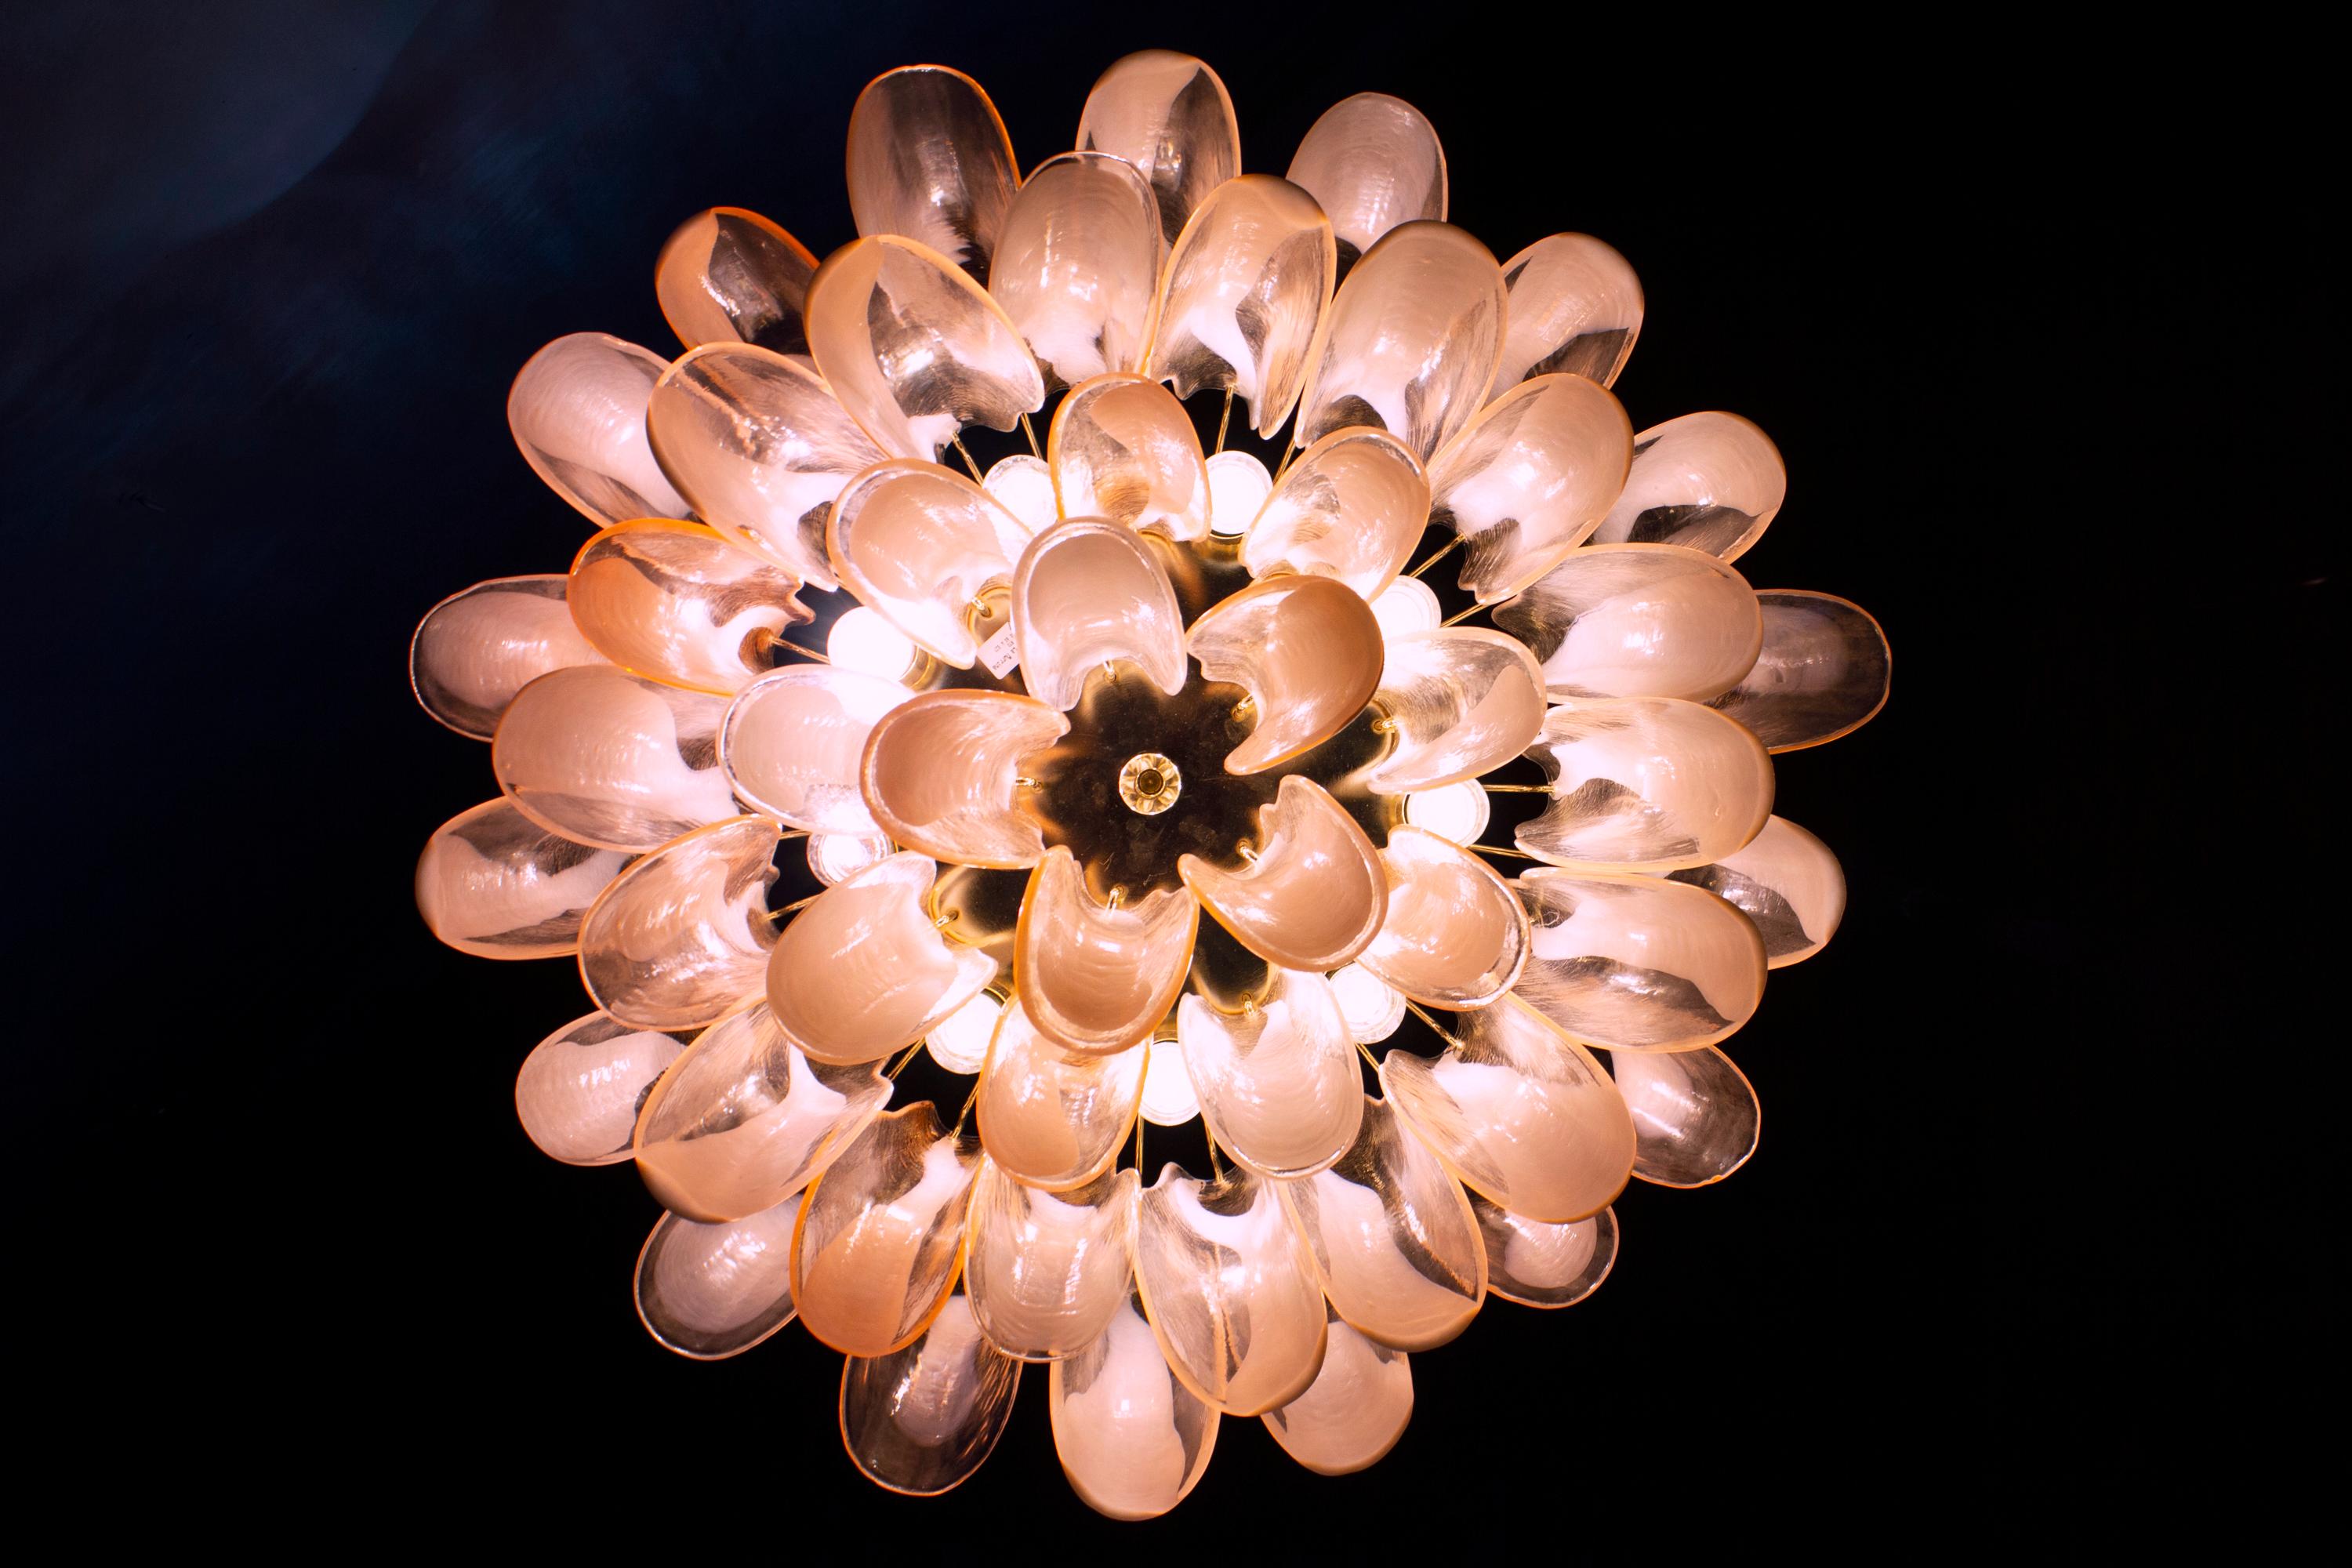 Charming Pink and White Murano Glass Petal Chandelier or Ceiling Light In Excellent Condition For Sale In Rome, IT